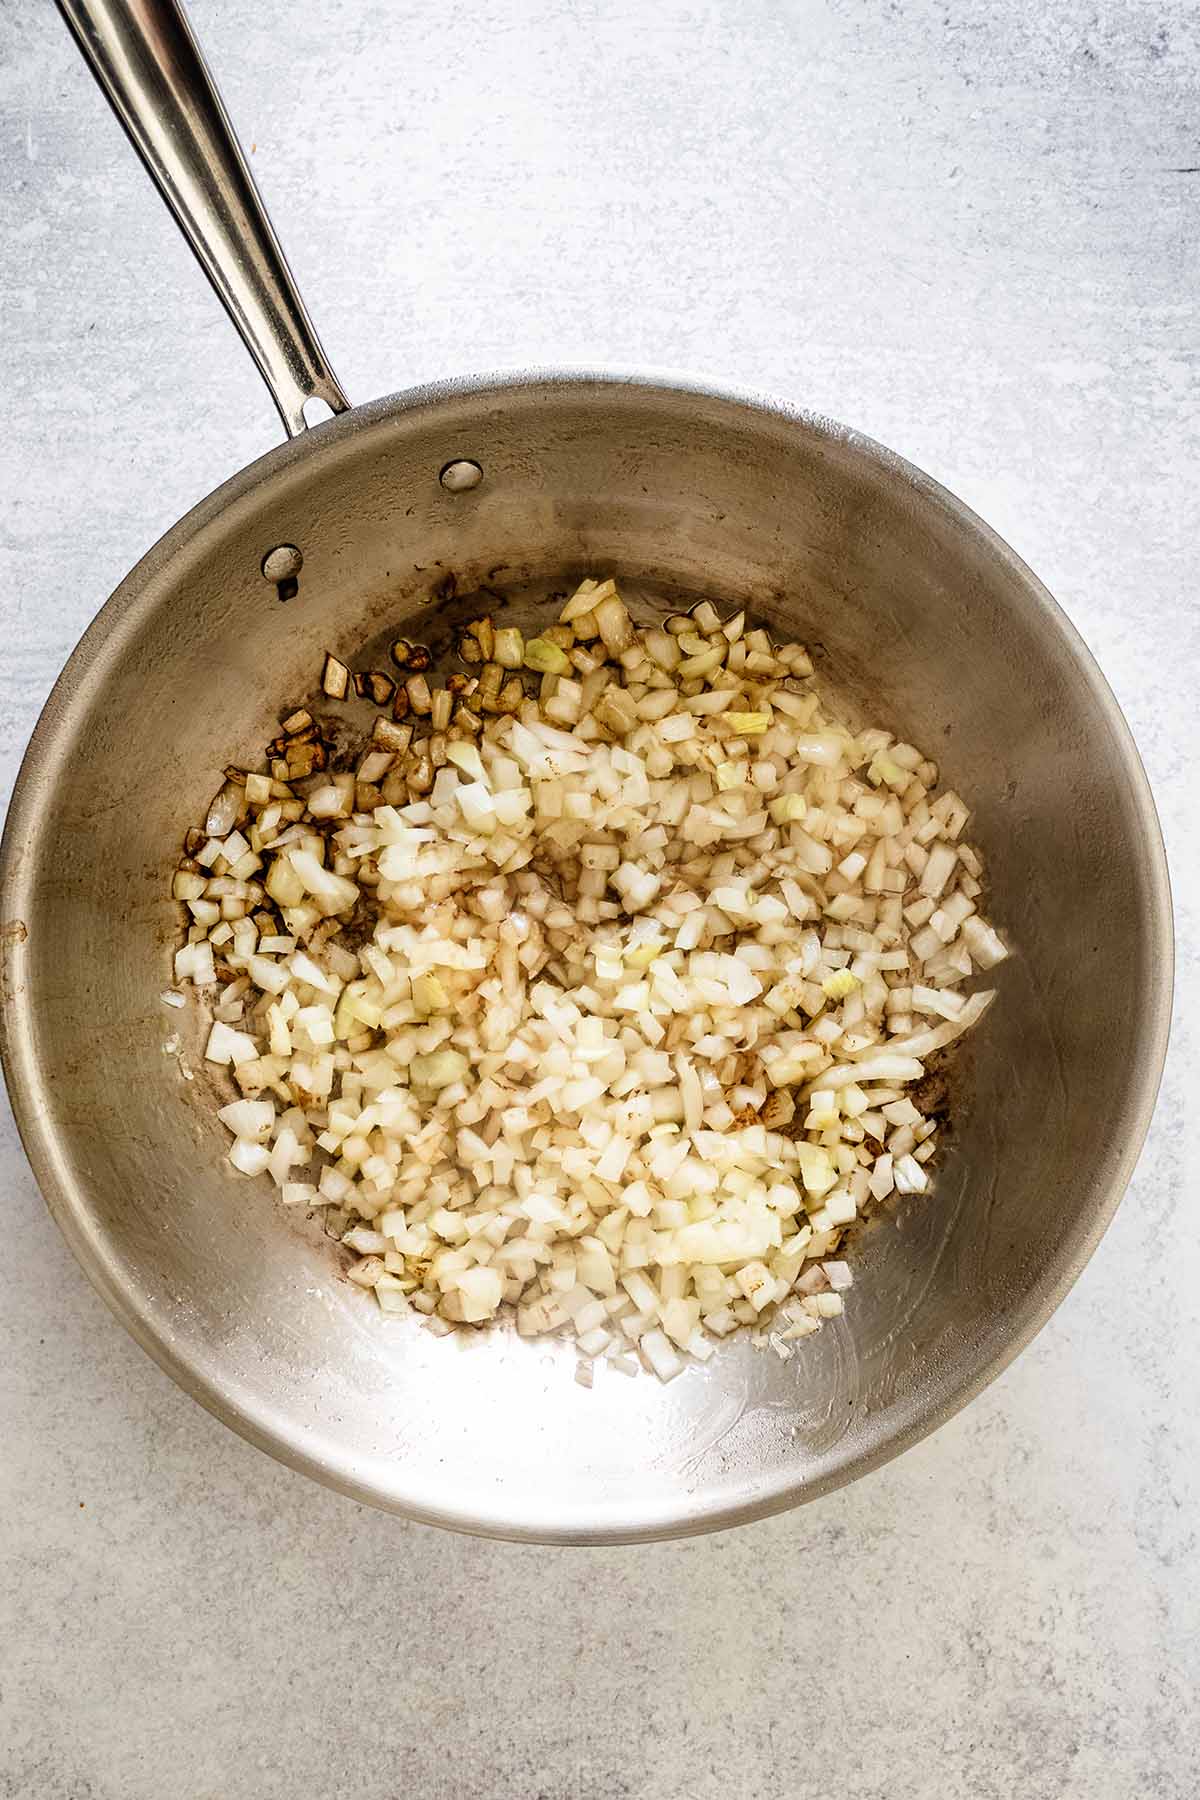 Cooked diced onion in a stainless steel skillet.